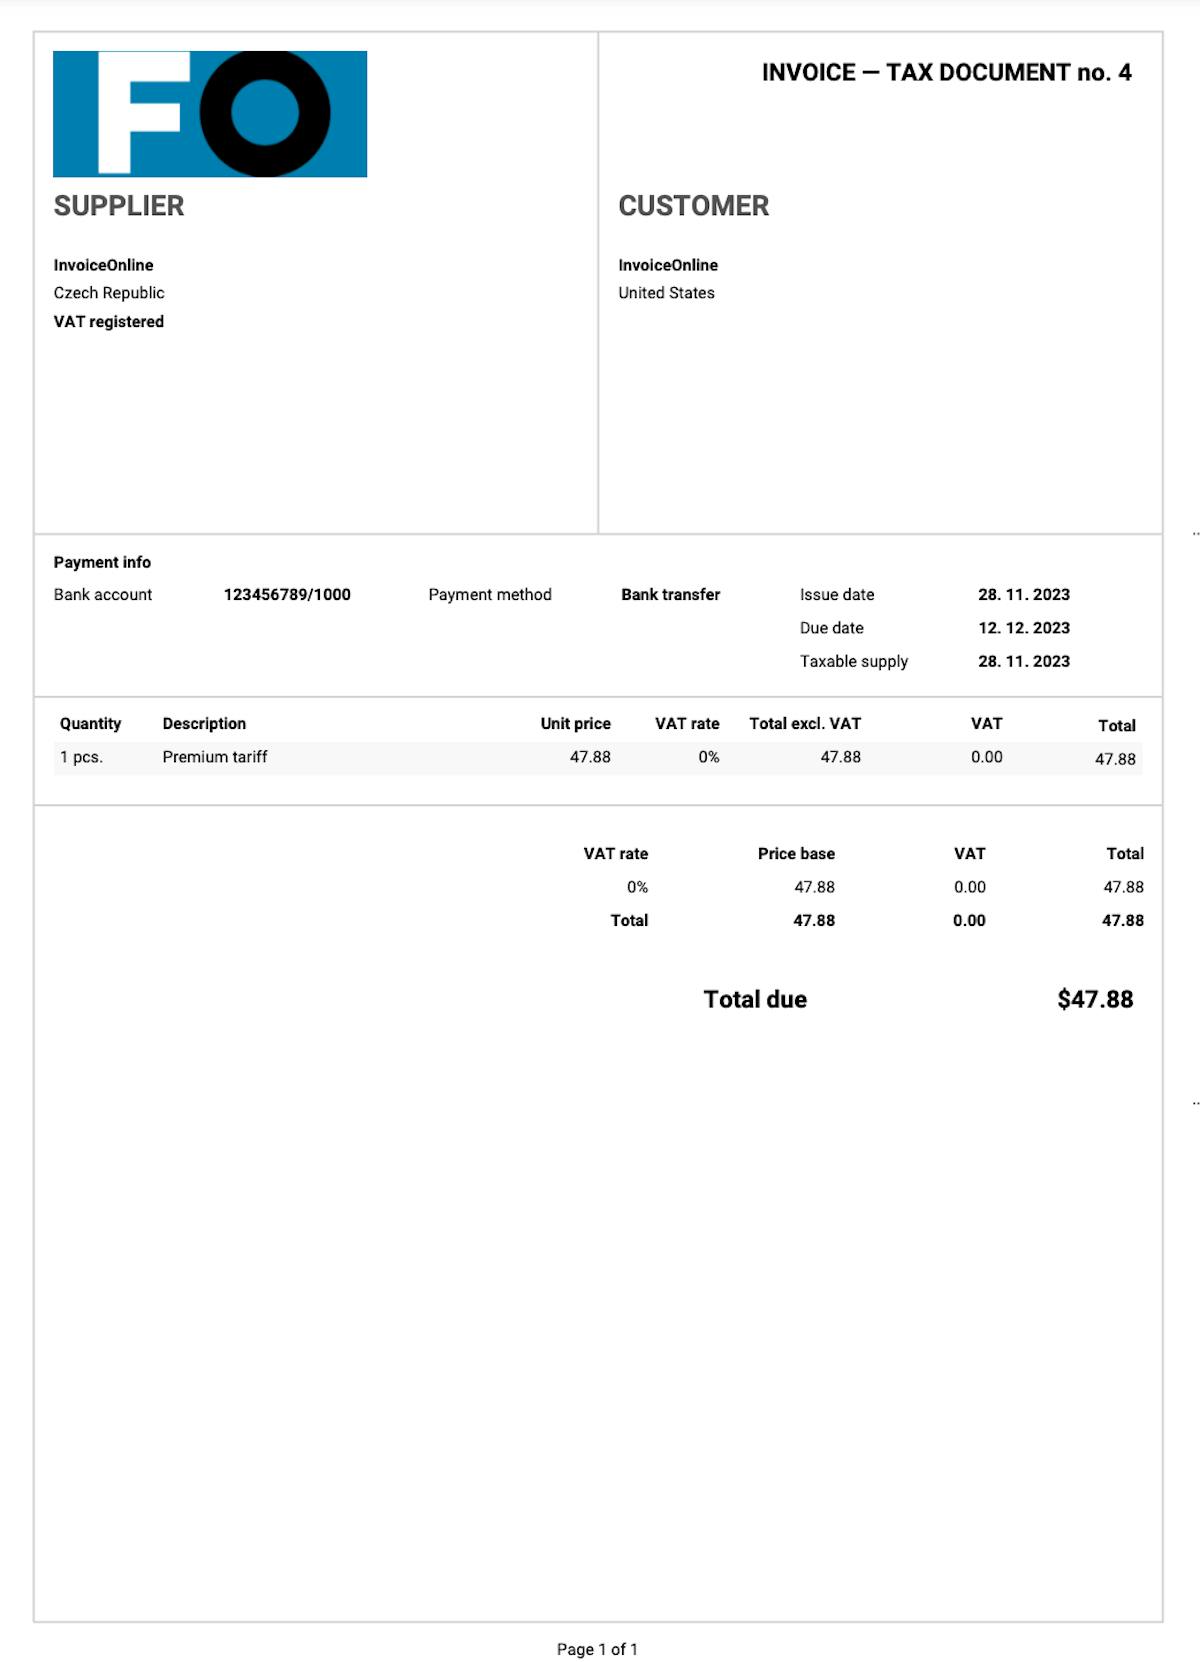 Simple invoice style